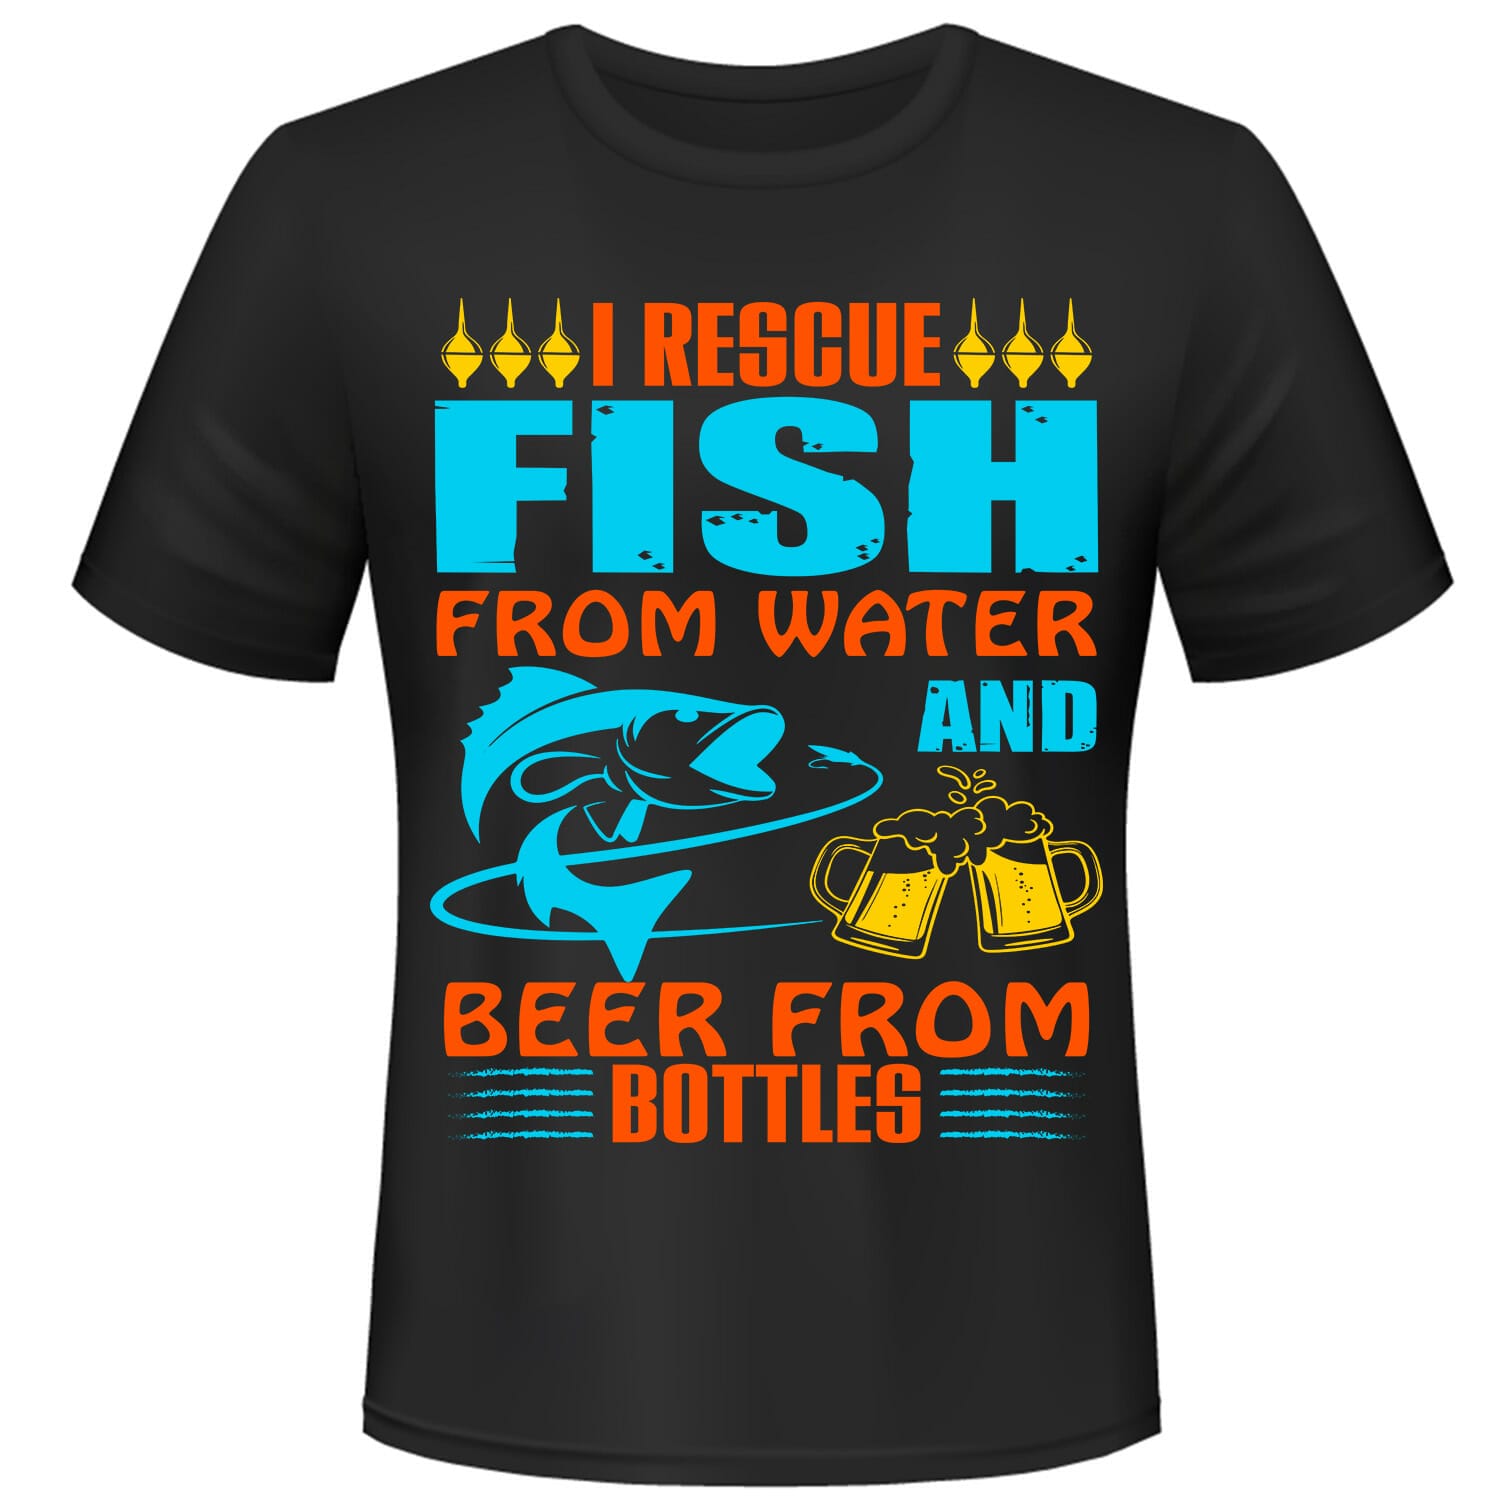 I rescue fish from water and beer from bottles - funny tshirt design